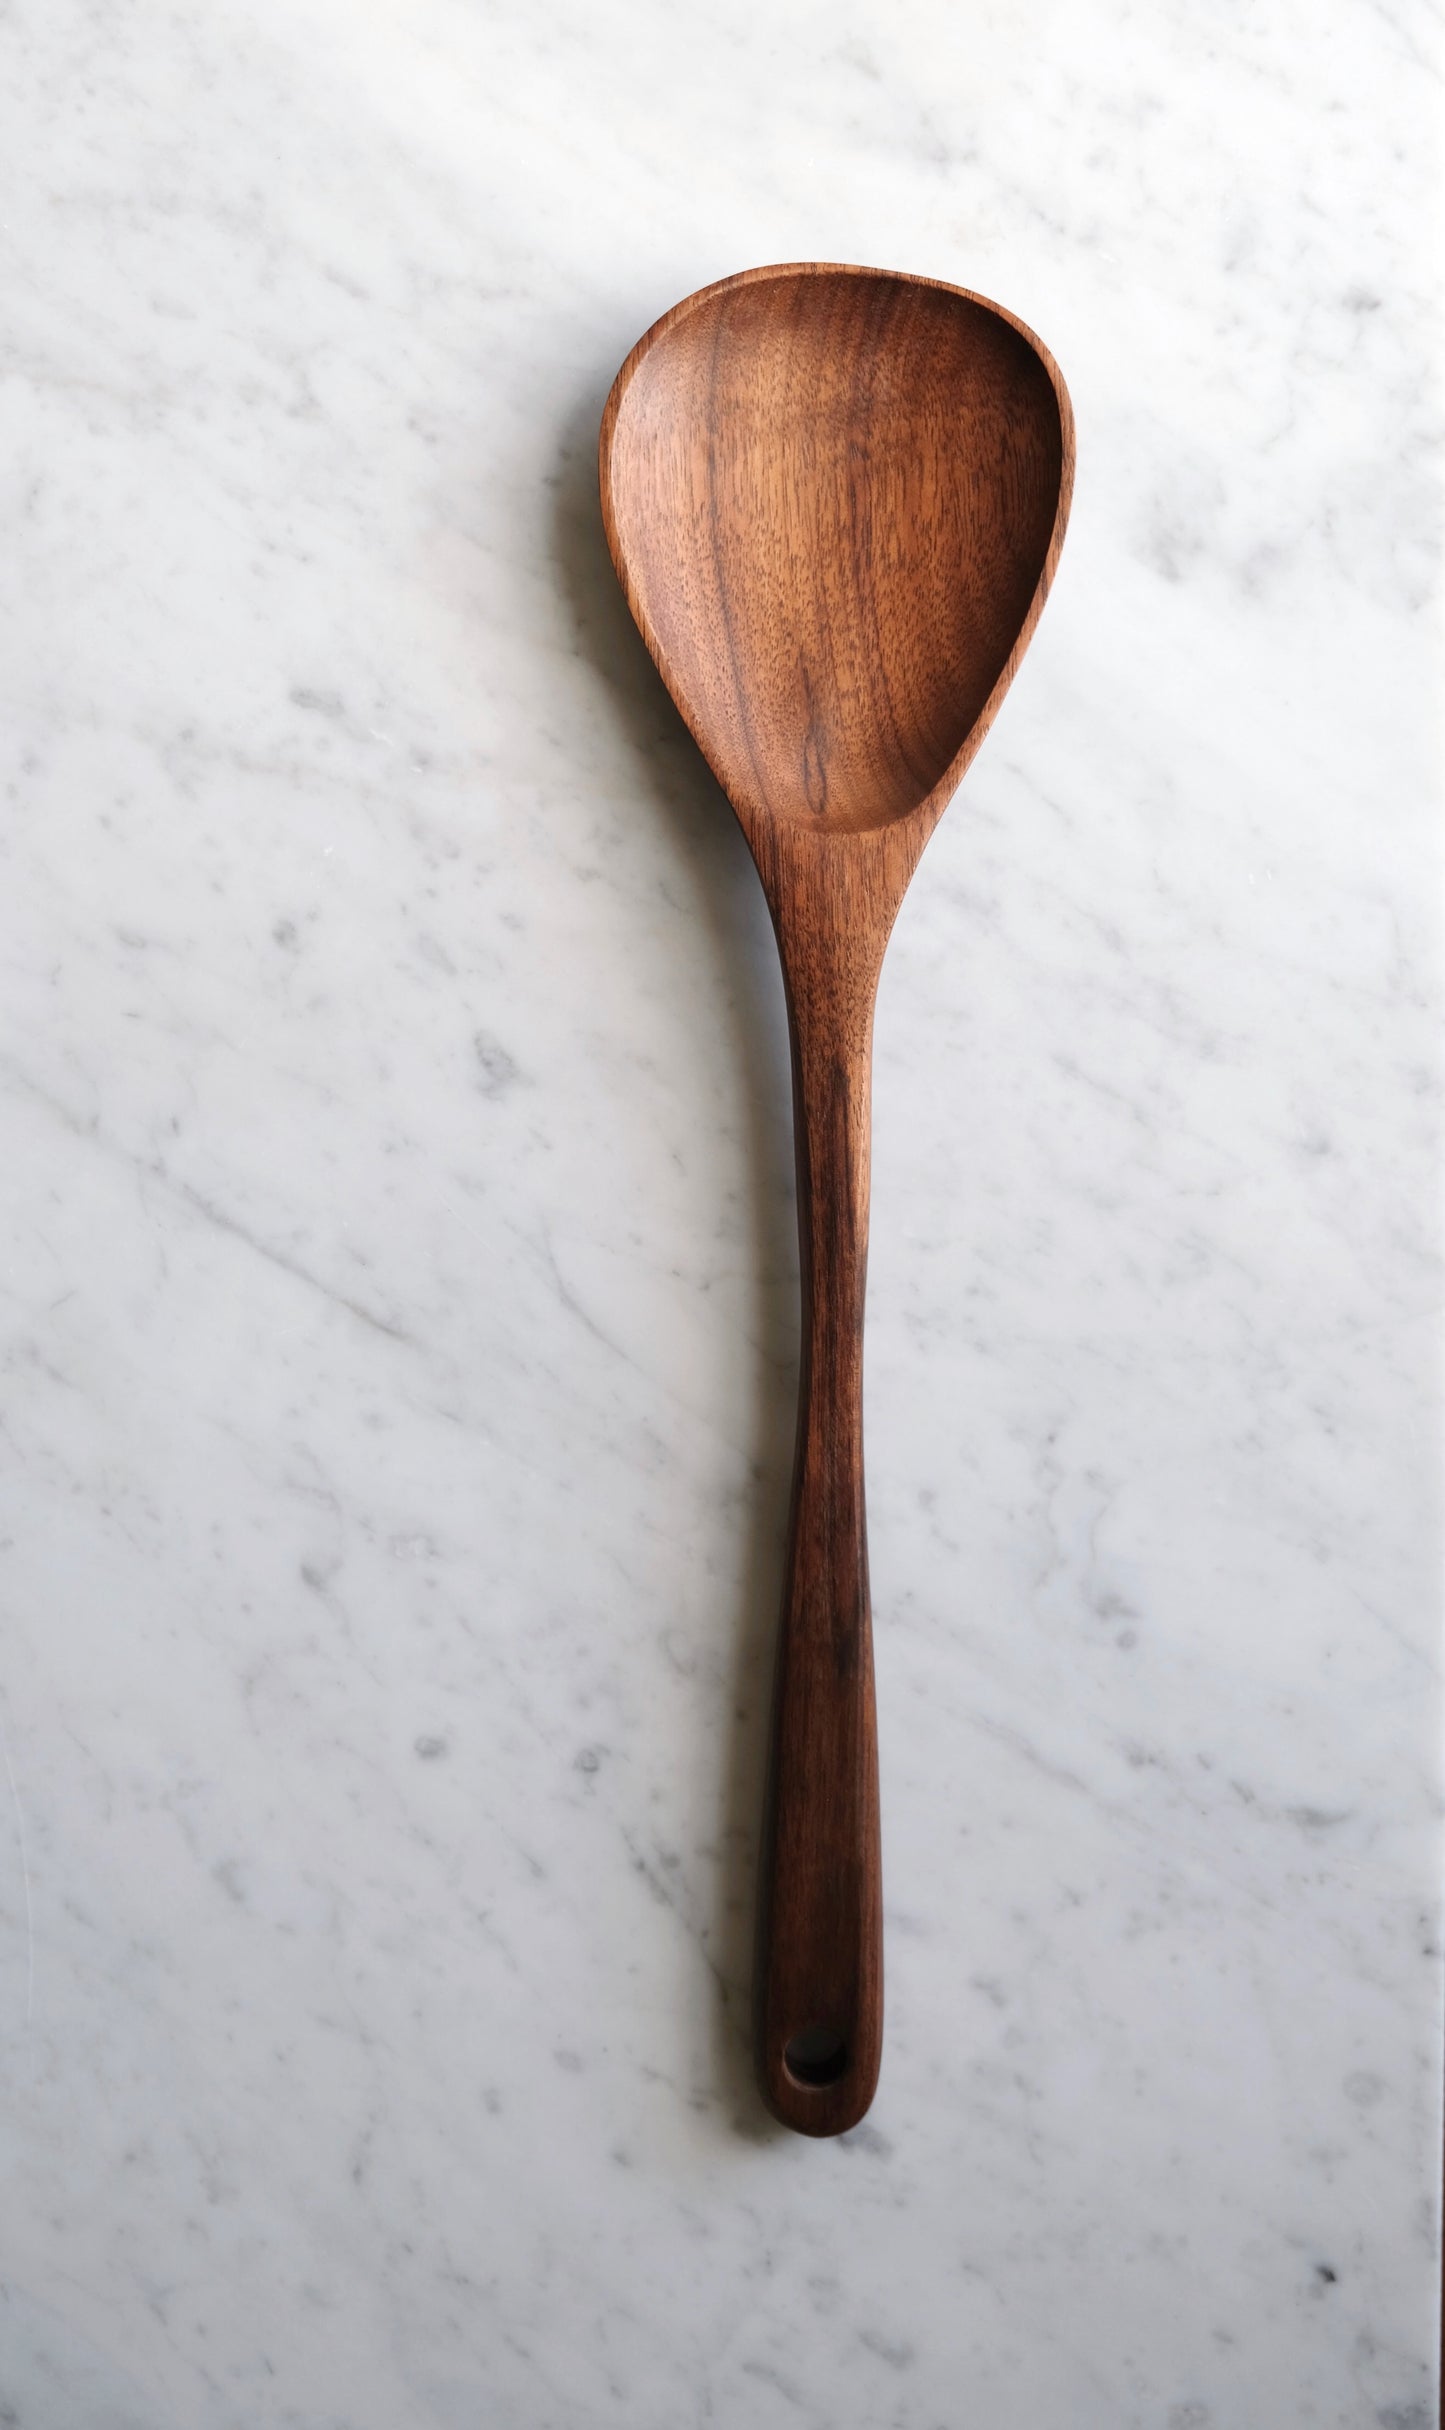 Hand-Carved Wooden Pan Spoon